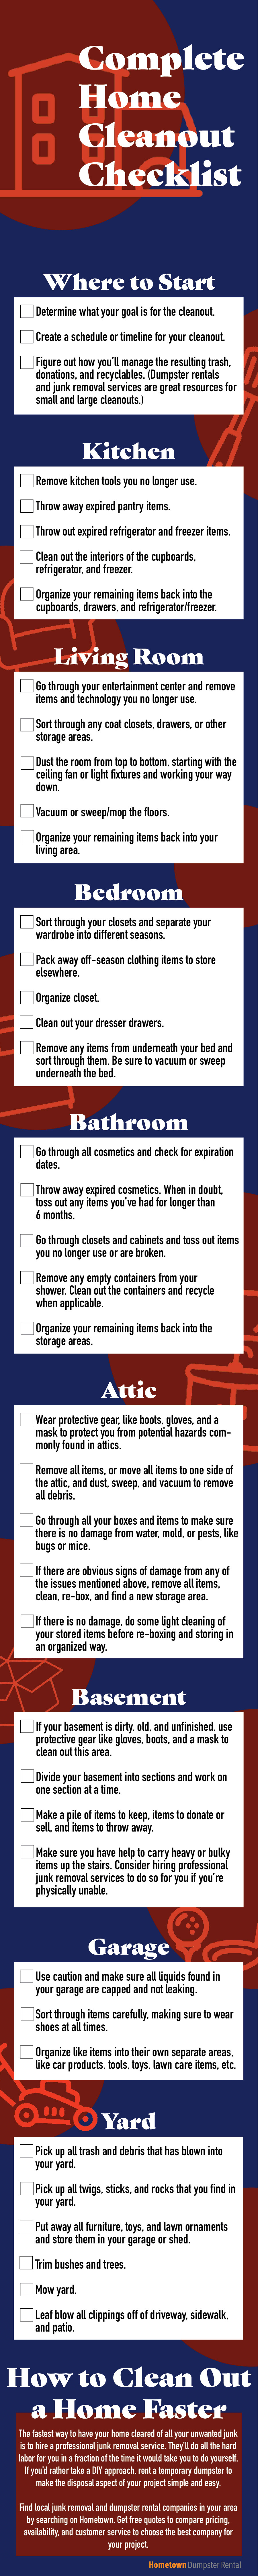 Complete Home Cleanout Checklist Infographic